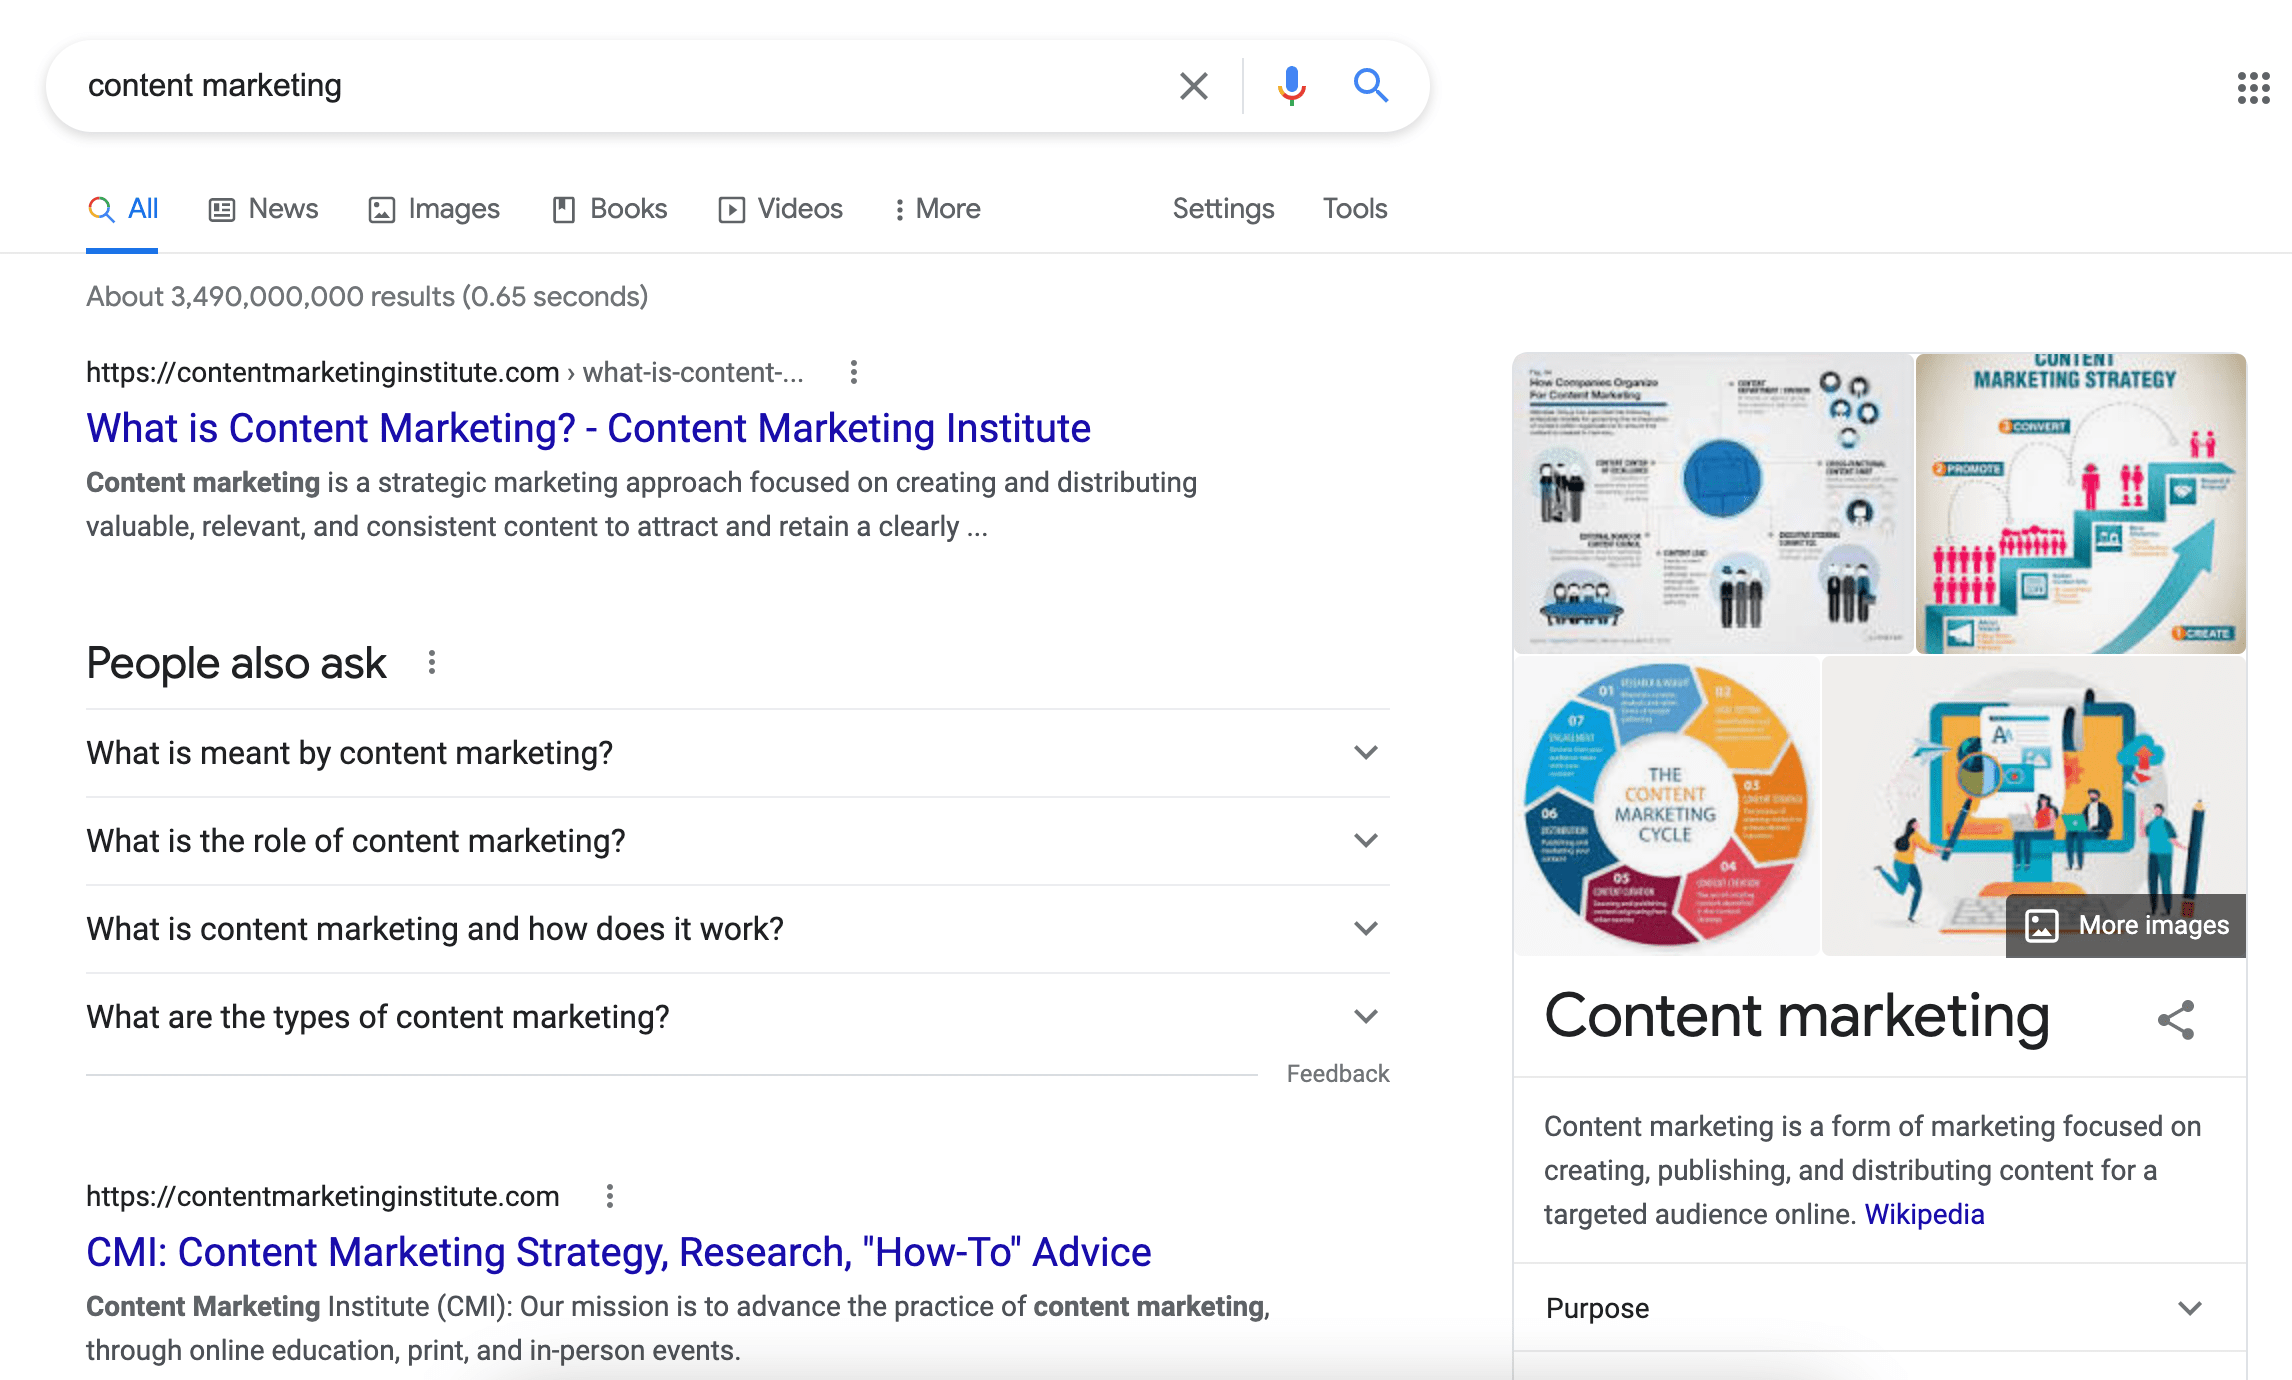 definition-related search results for the term content marketing